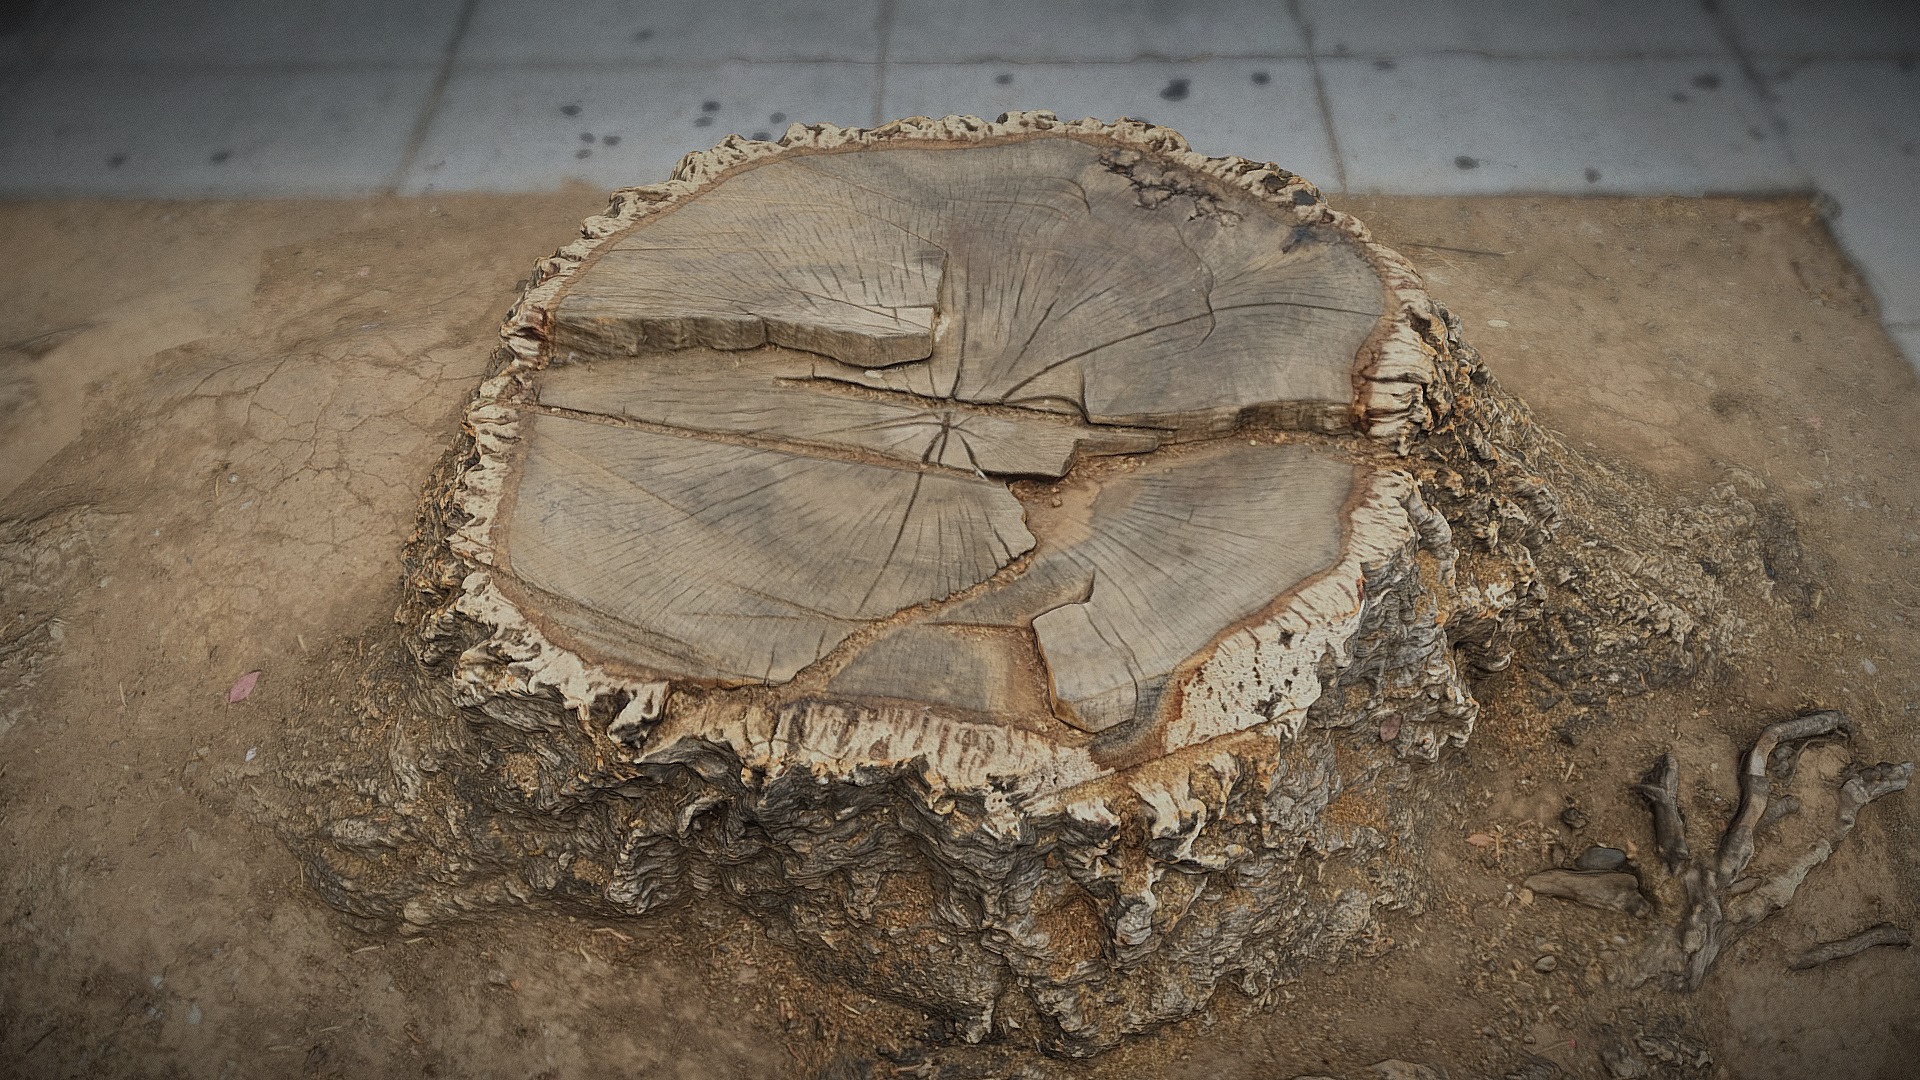 3D model Stump - This is a 3D model of the Stump. The 3D model is about a stone sculpture on a concrete surface.